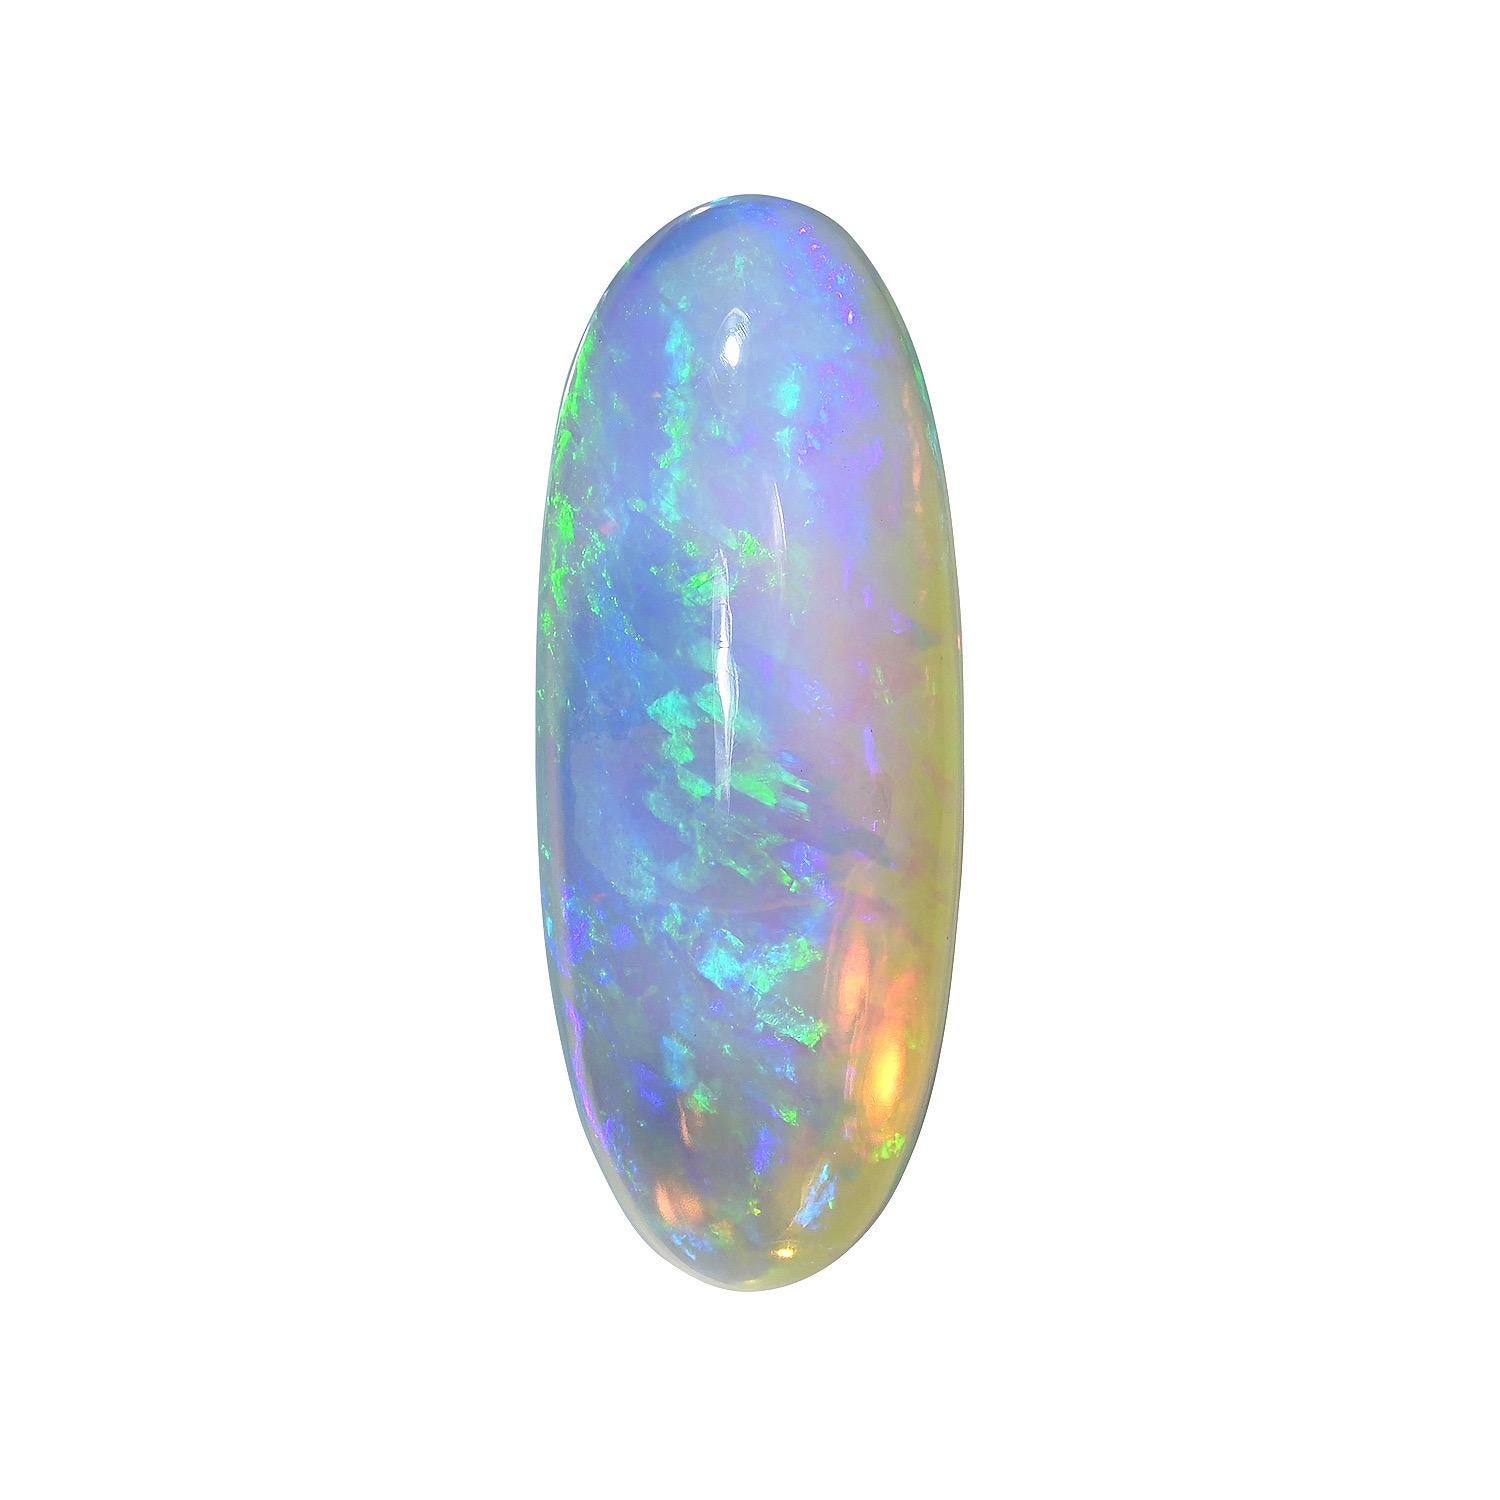 Oval Cut Opal Stone 27.42 Carat Natural Ethiopian Oval loose Gemstone For Sale